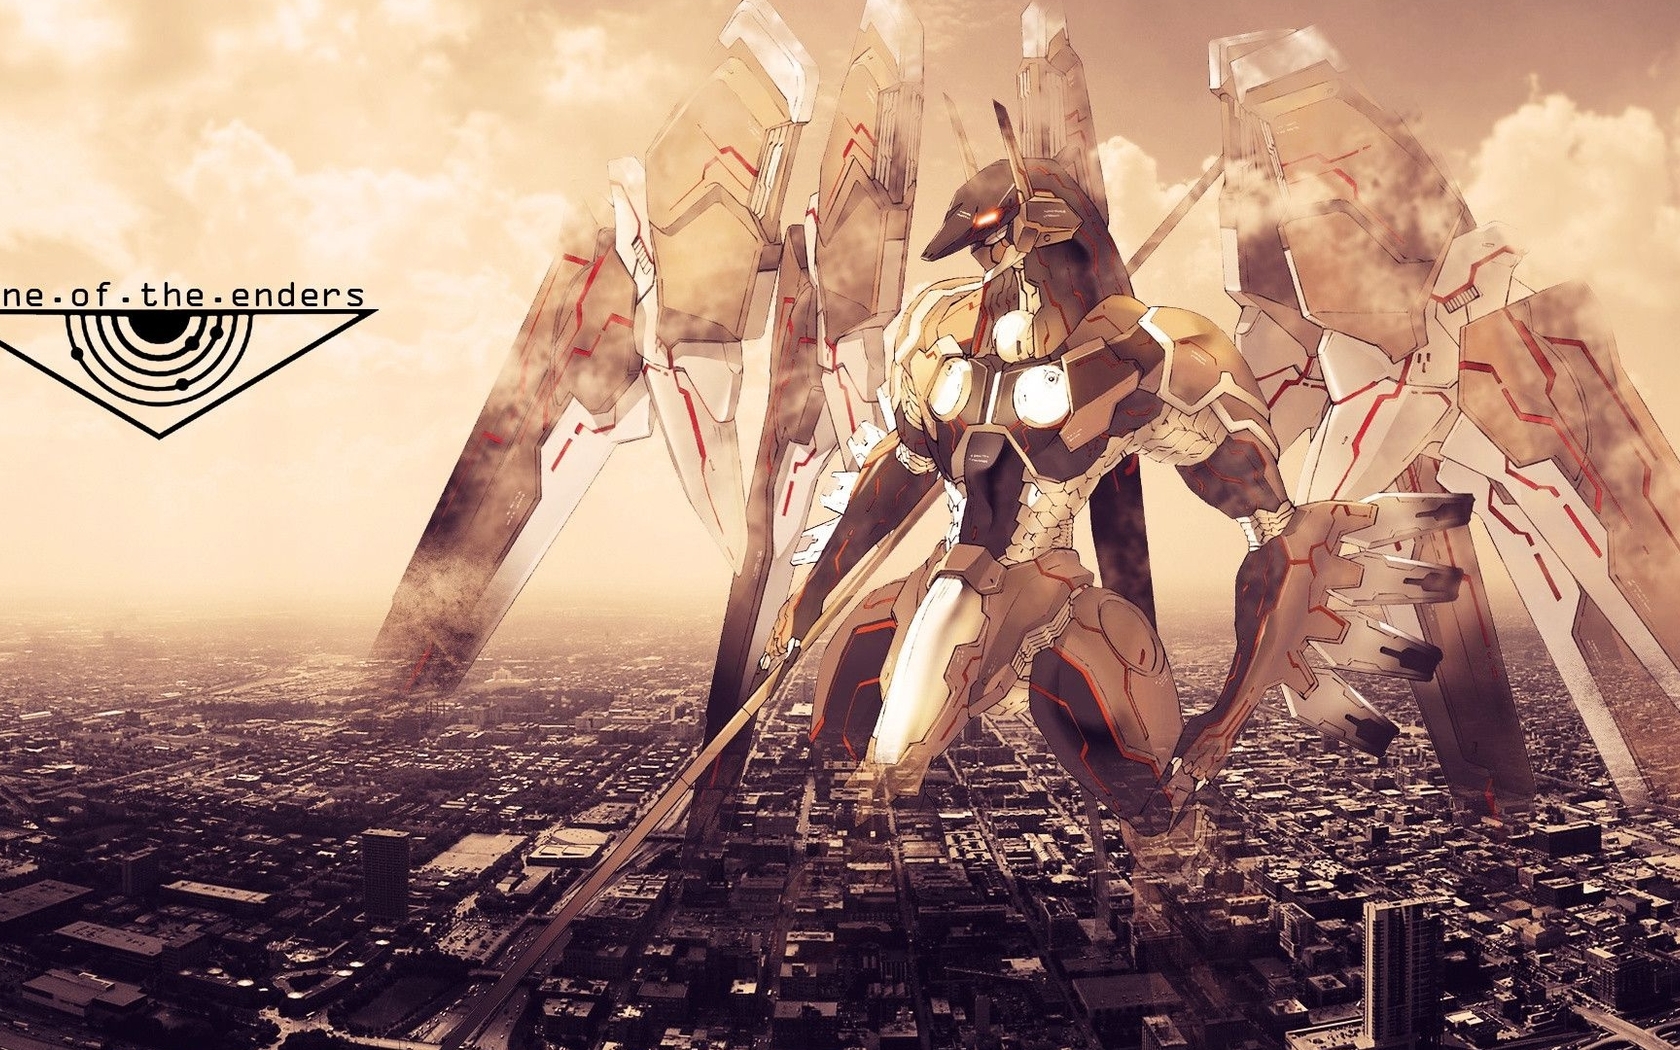 Zone of The Enders giant robot in the city Widescreen Wallpaper ...